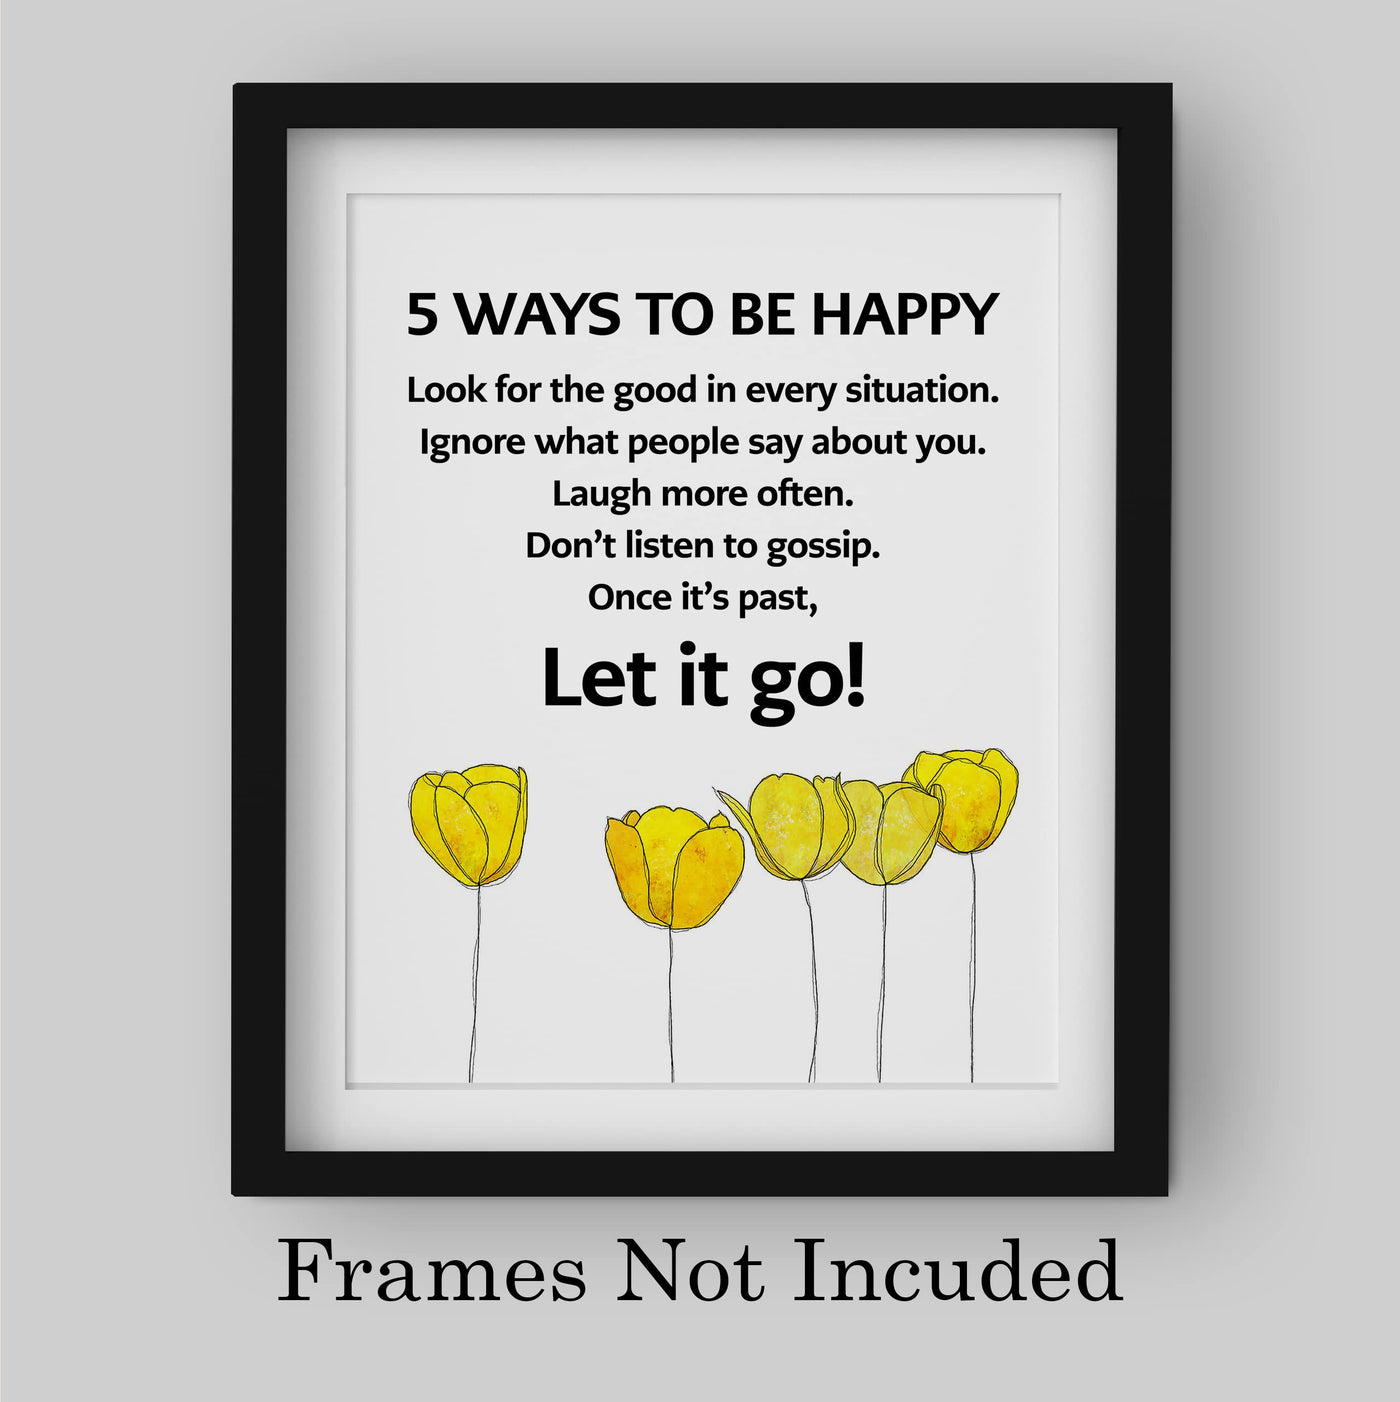 5 Ways to Be Happy Inspirational Quotes Print Wall Decor -8 x 10" Motivational Floral Art Print -Ready to Frame. Modern Decoration for Home-Office-Classroom-Work Decor. Great Life Lesson-Let It Go!